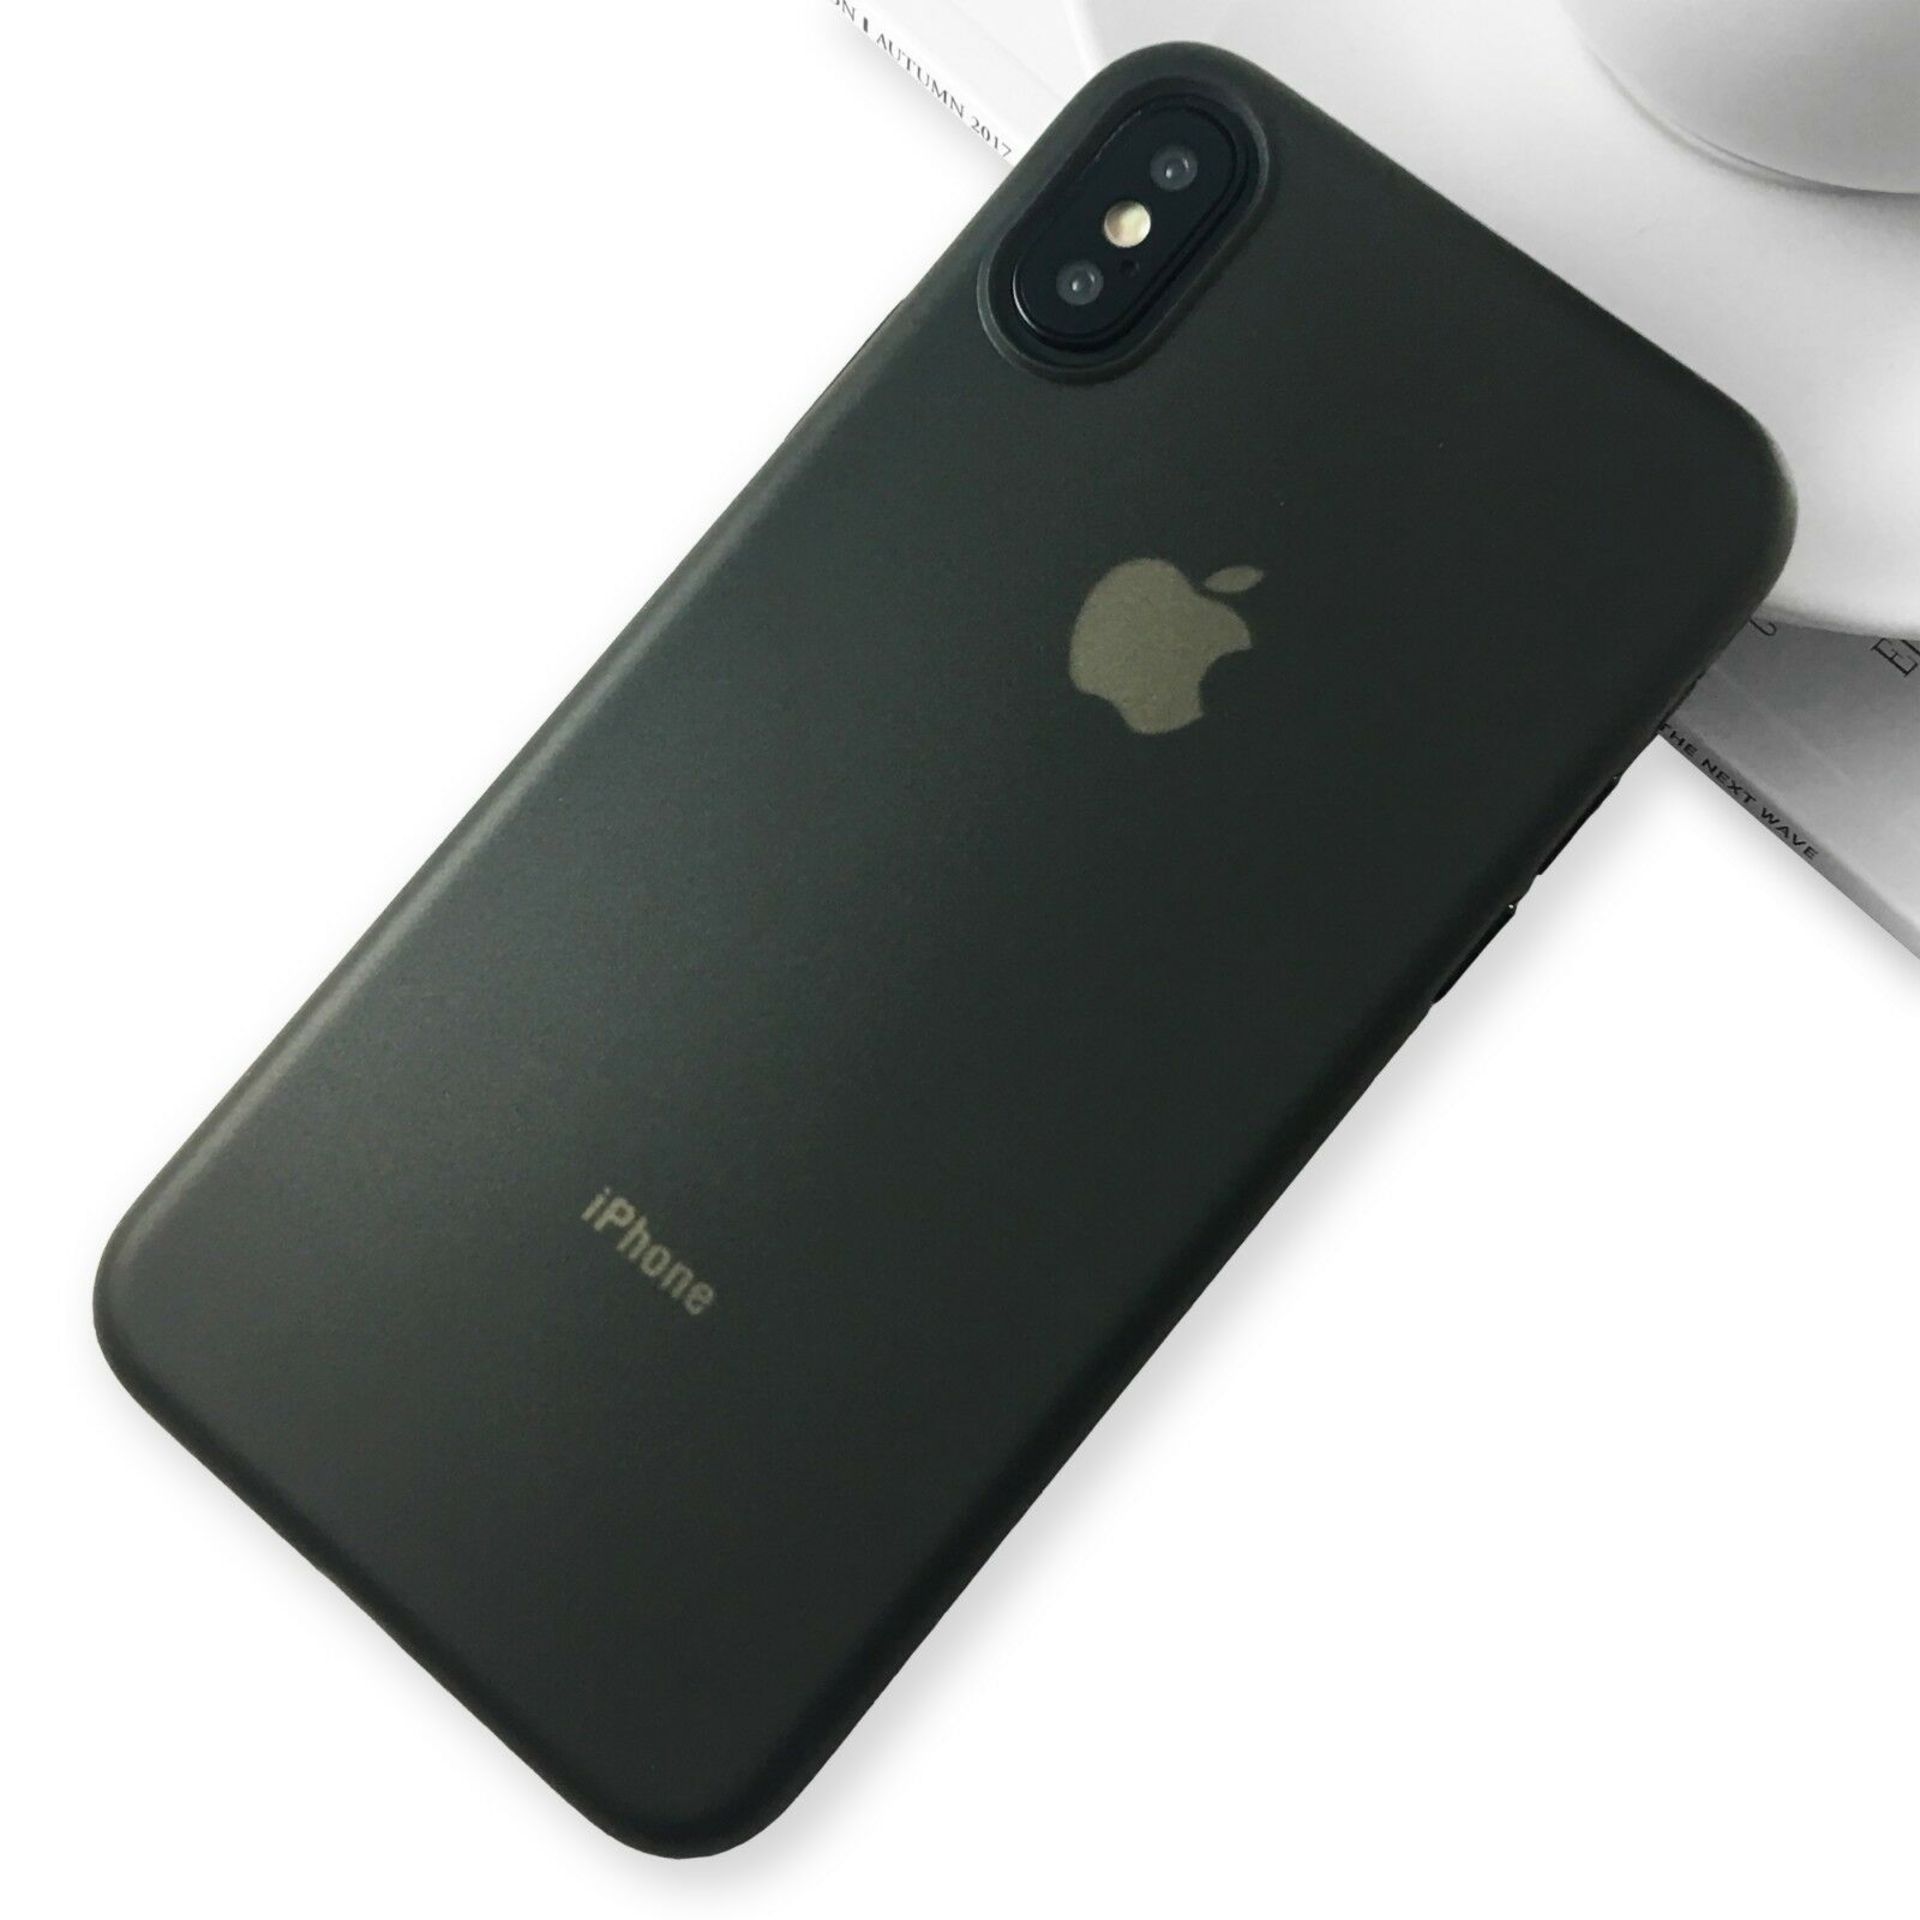 4 X ULTRA THIN 0.2MM PLASTIC CASE COVERS FOR IPHONE X/XS, CLEAR, LIGHT GREY AND DARK GREY *NO VAT* - Image 2 of 3